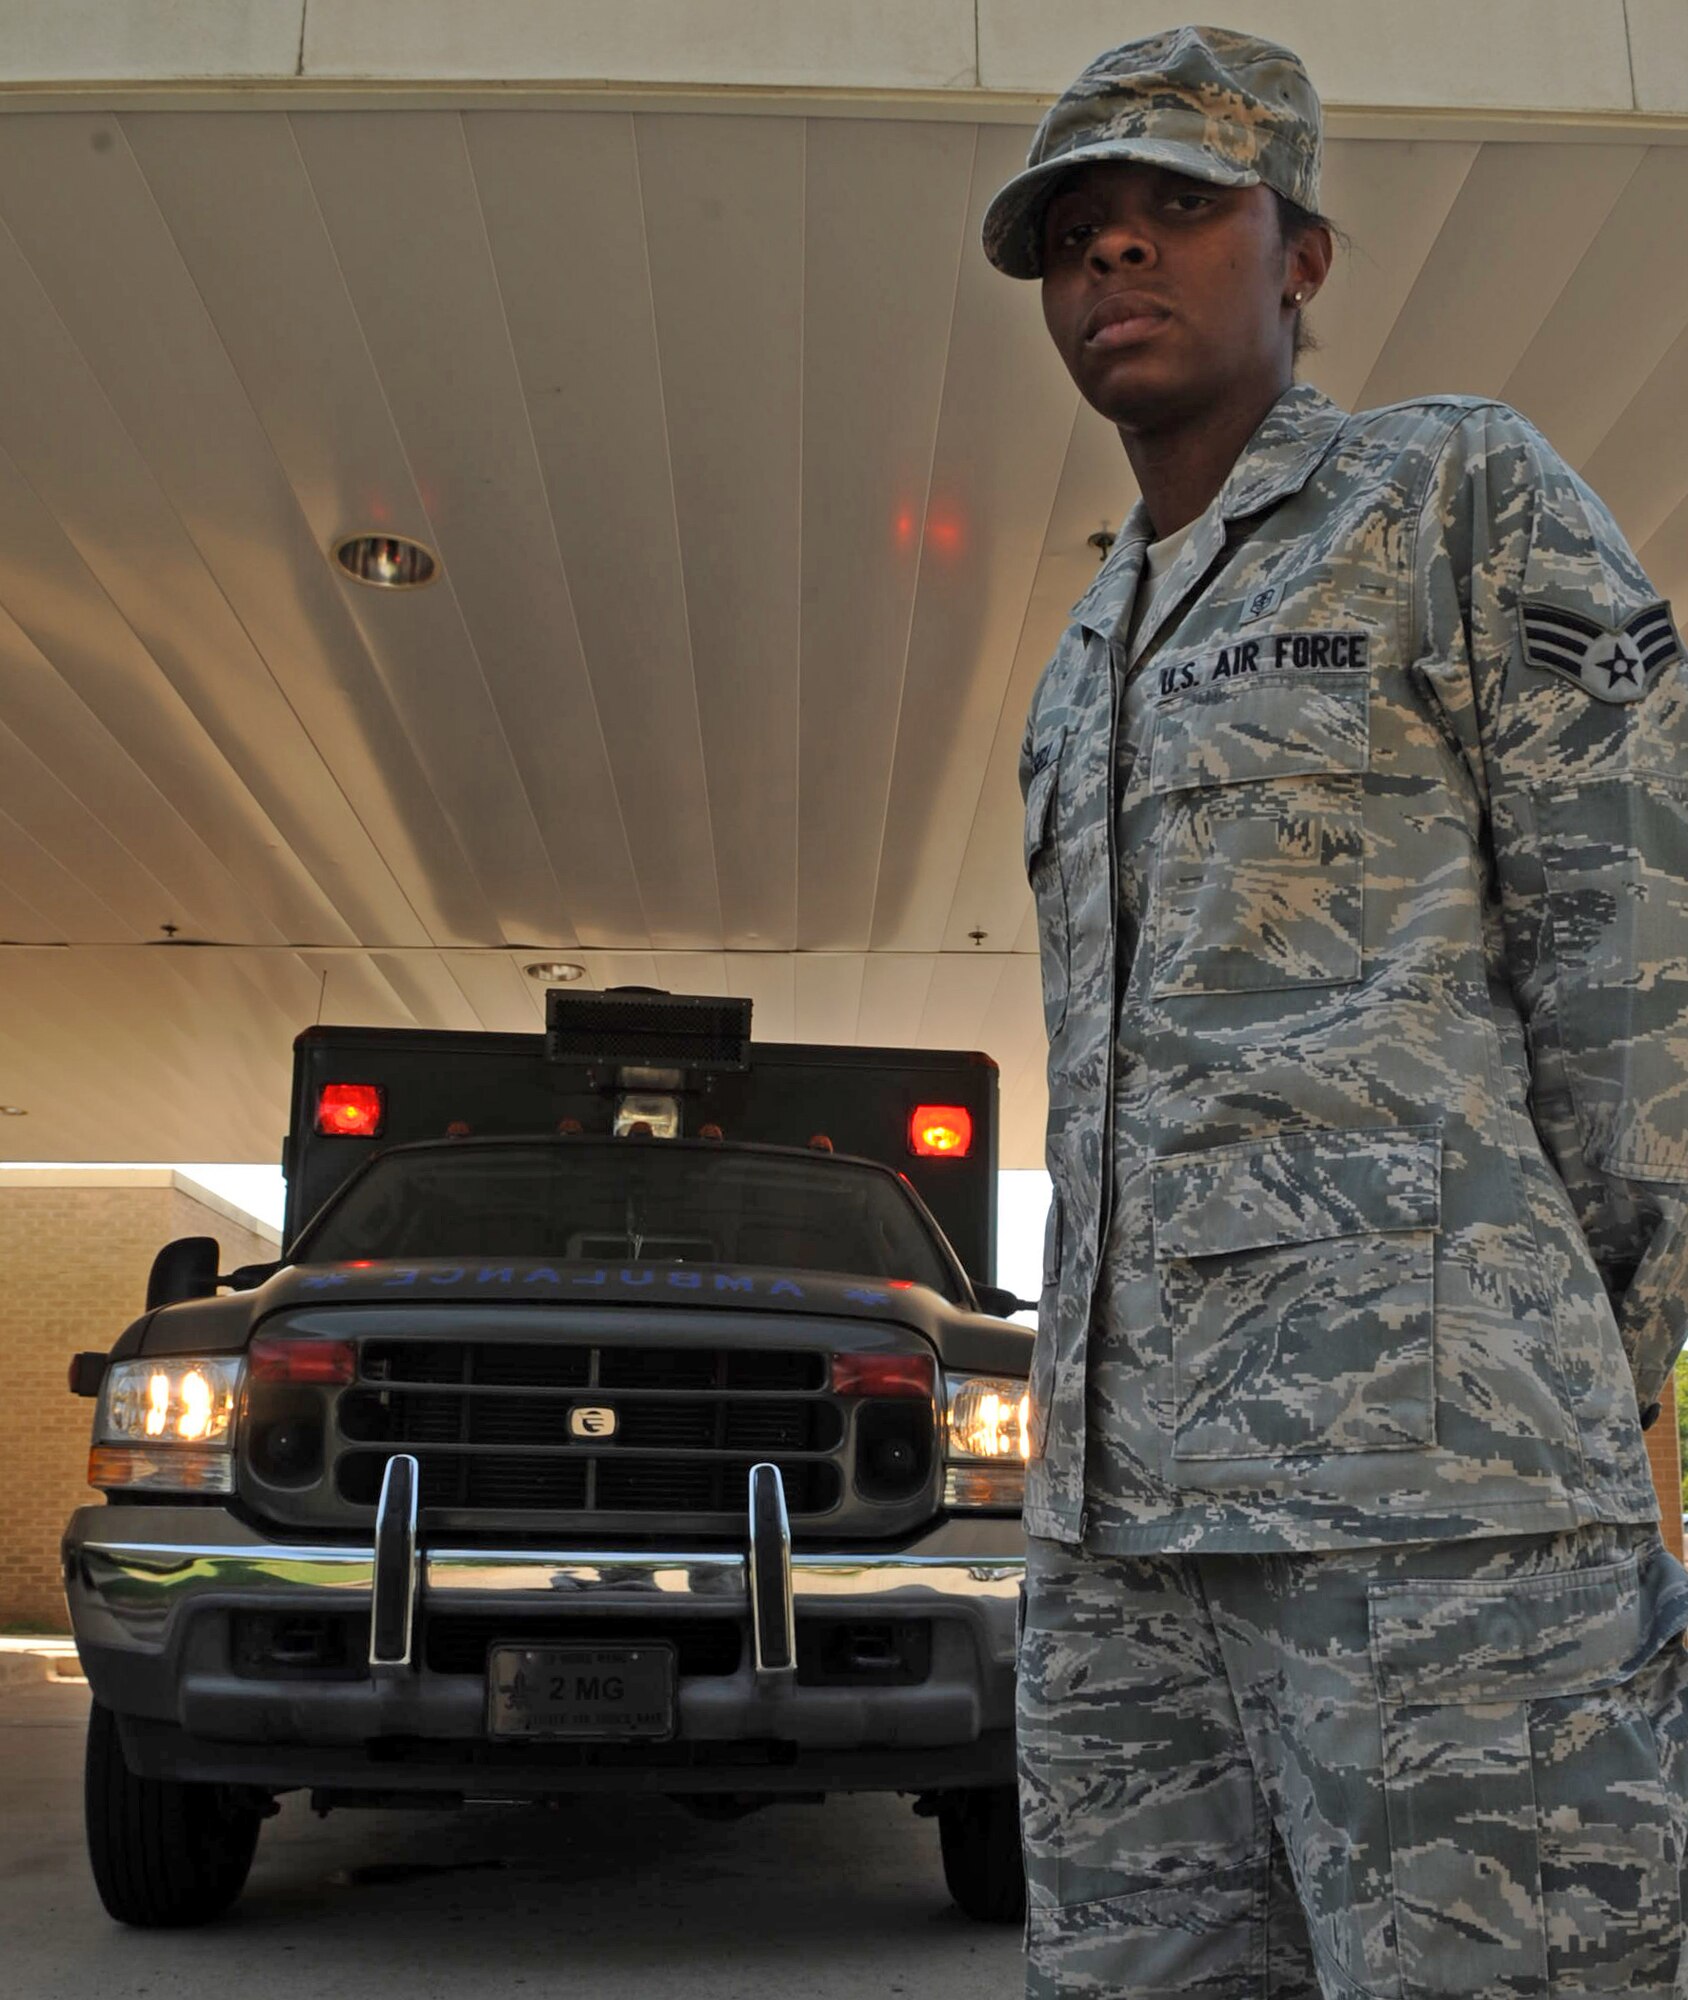 Senior Airman Jasmine Russell, 2nd Medical Operations Squadron, stands at parade rest in front of an ambulance on Barksdale Air Force Base, La., June 29. Airman Russell recently returned from her first deployment. On her deployment she sustained injuries due to an improvised explosive device that hit the vehicle she was traveling in. Despite her injuries, Airman Russell continued to provide medical care to the injured after the blast. (U.S. Air Force photo/Airman 1st Class Micaiah Anthony)(RELEASED)